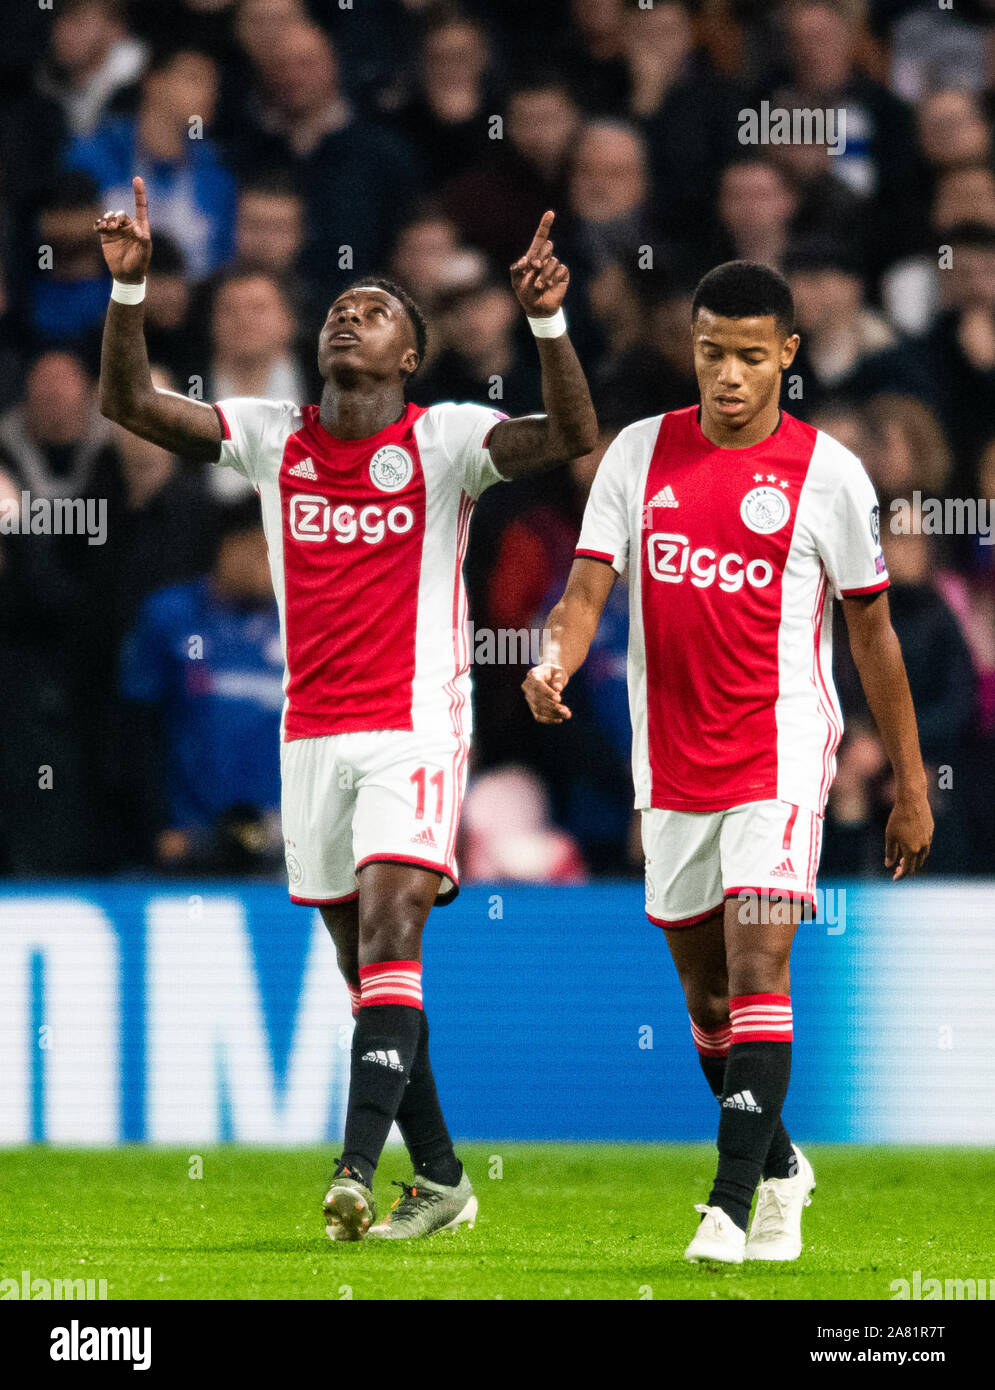 London, UK. 05th Nov, 2019. Ajax Quincy Promes no 11 after scoring second  goal for his club during the UEFA Champions League group match between  Chelsea and Ajax at Stamford Bridge, London,